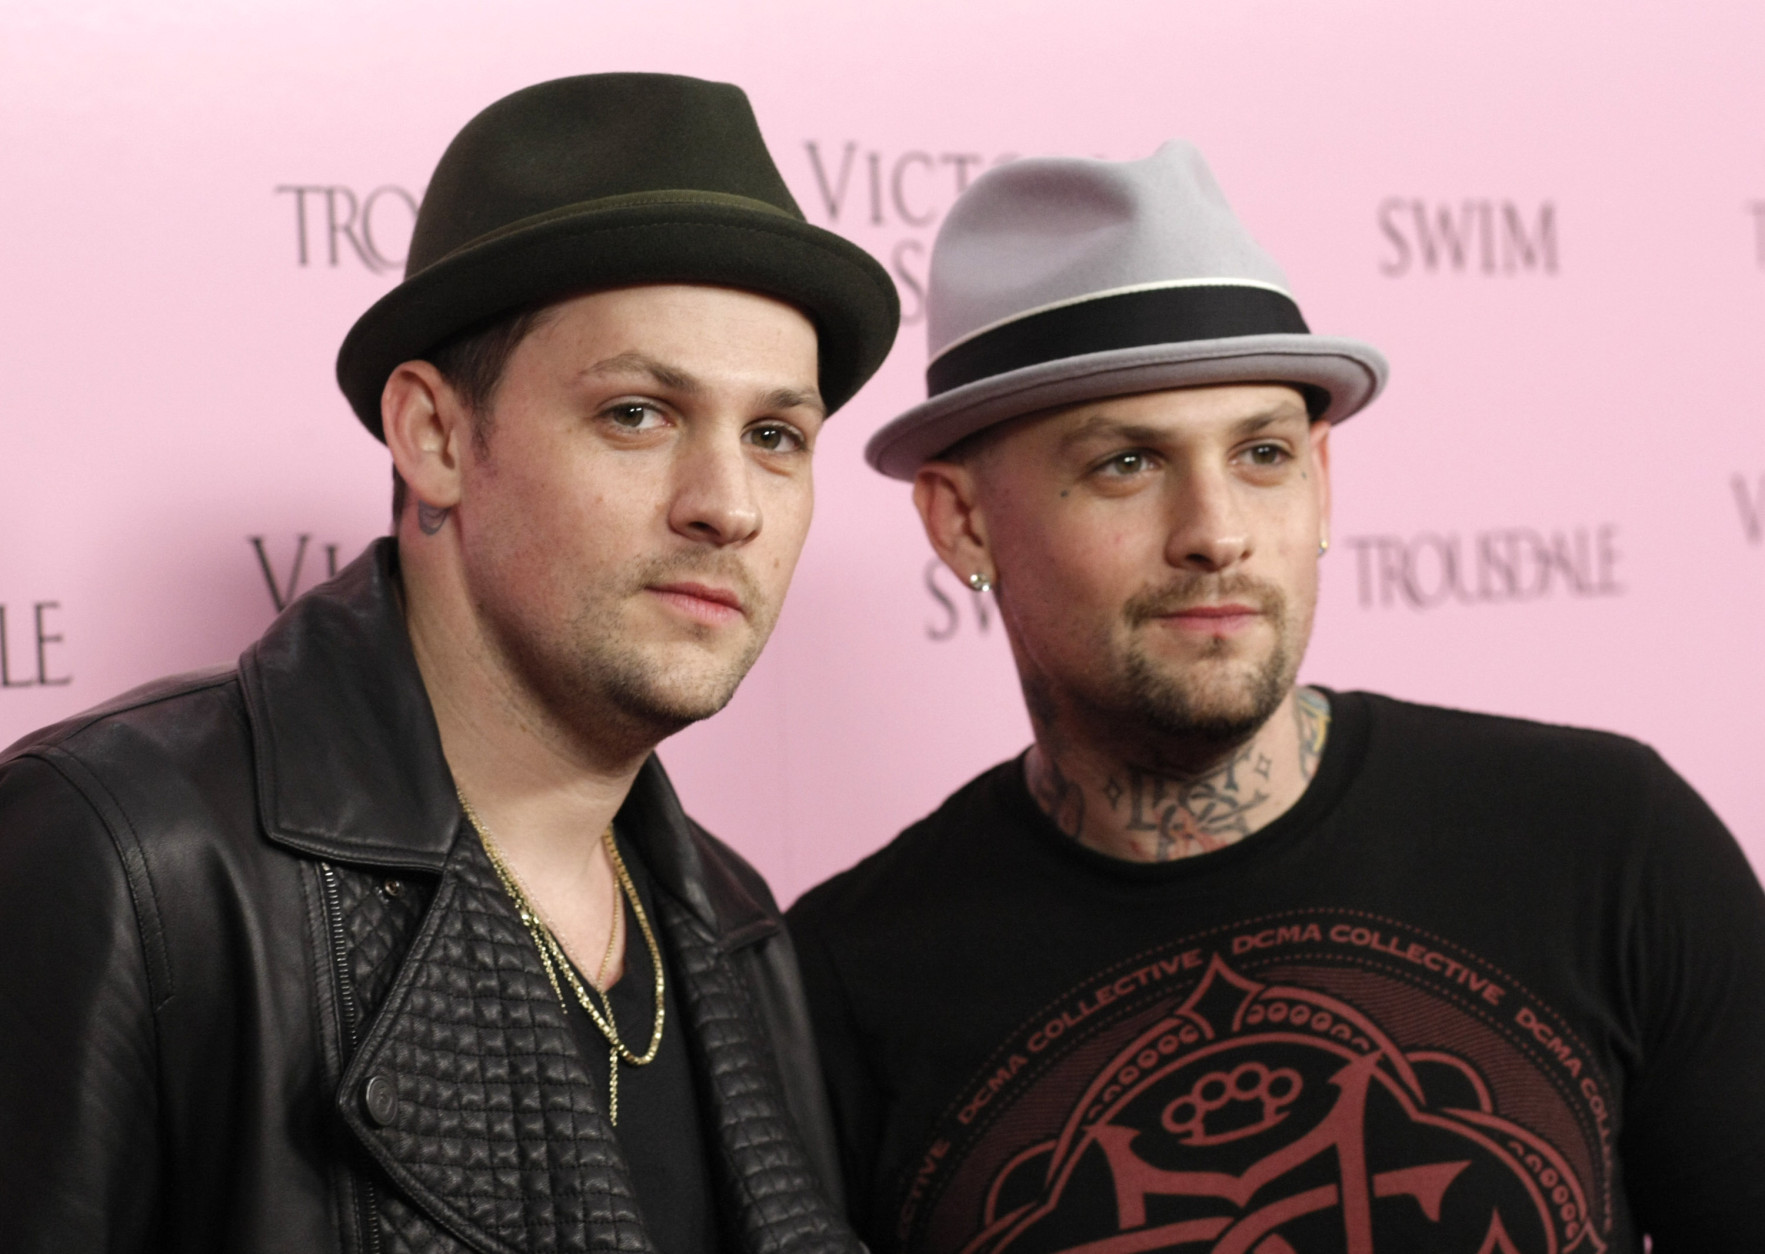 Musician Joel Madden, left, and his brother Benji Madden arrive at the Victoria's Secret SWIM catalog 15th anniversary party in West Hollywood, Calif. on Thursday, March 25, 2010. (AP Photo/Dan Steinberg)